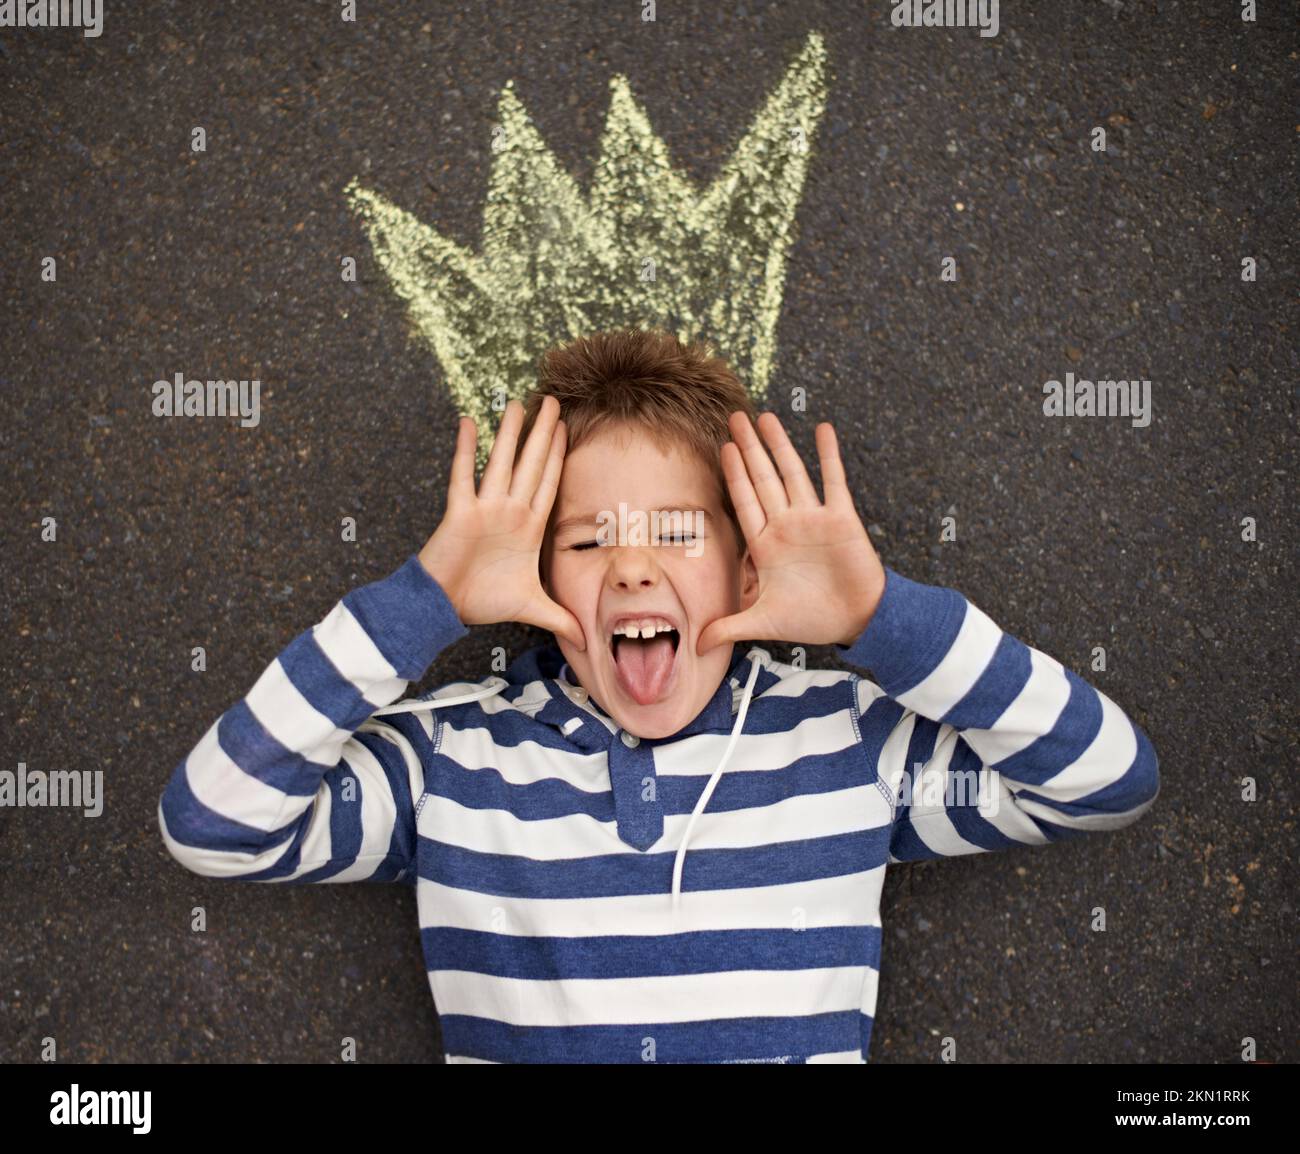 Being a silly billy. Top view shot of a young boy lying on the ground and pulling faces at the camera. Stock Photo